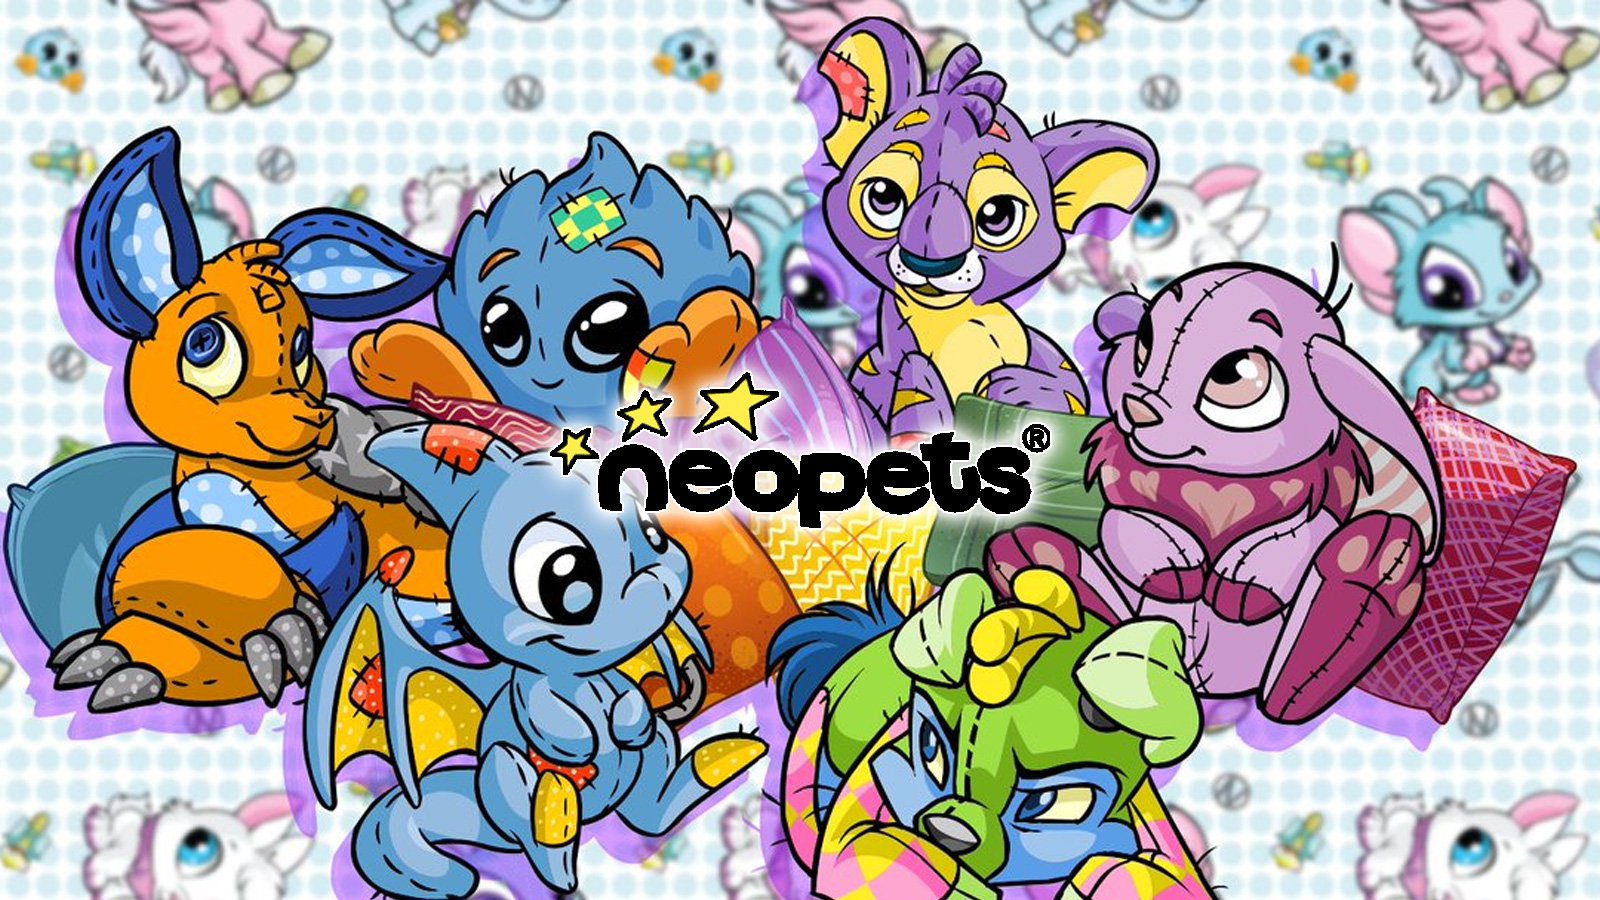 Neopets data breach exposes personal data of 69 million members